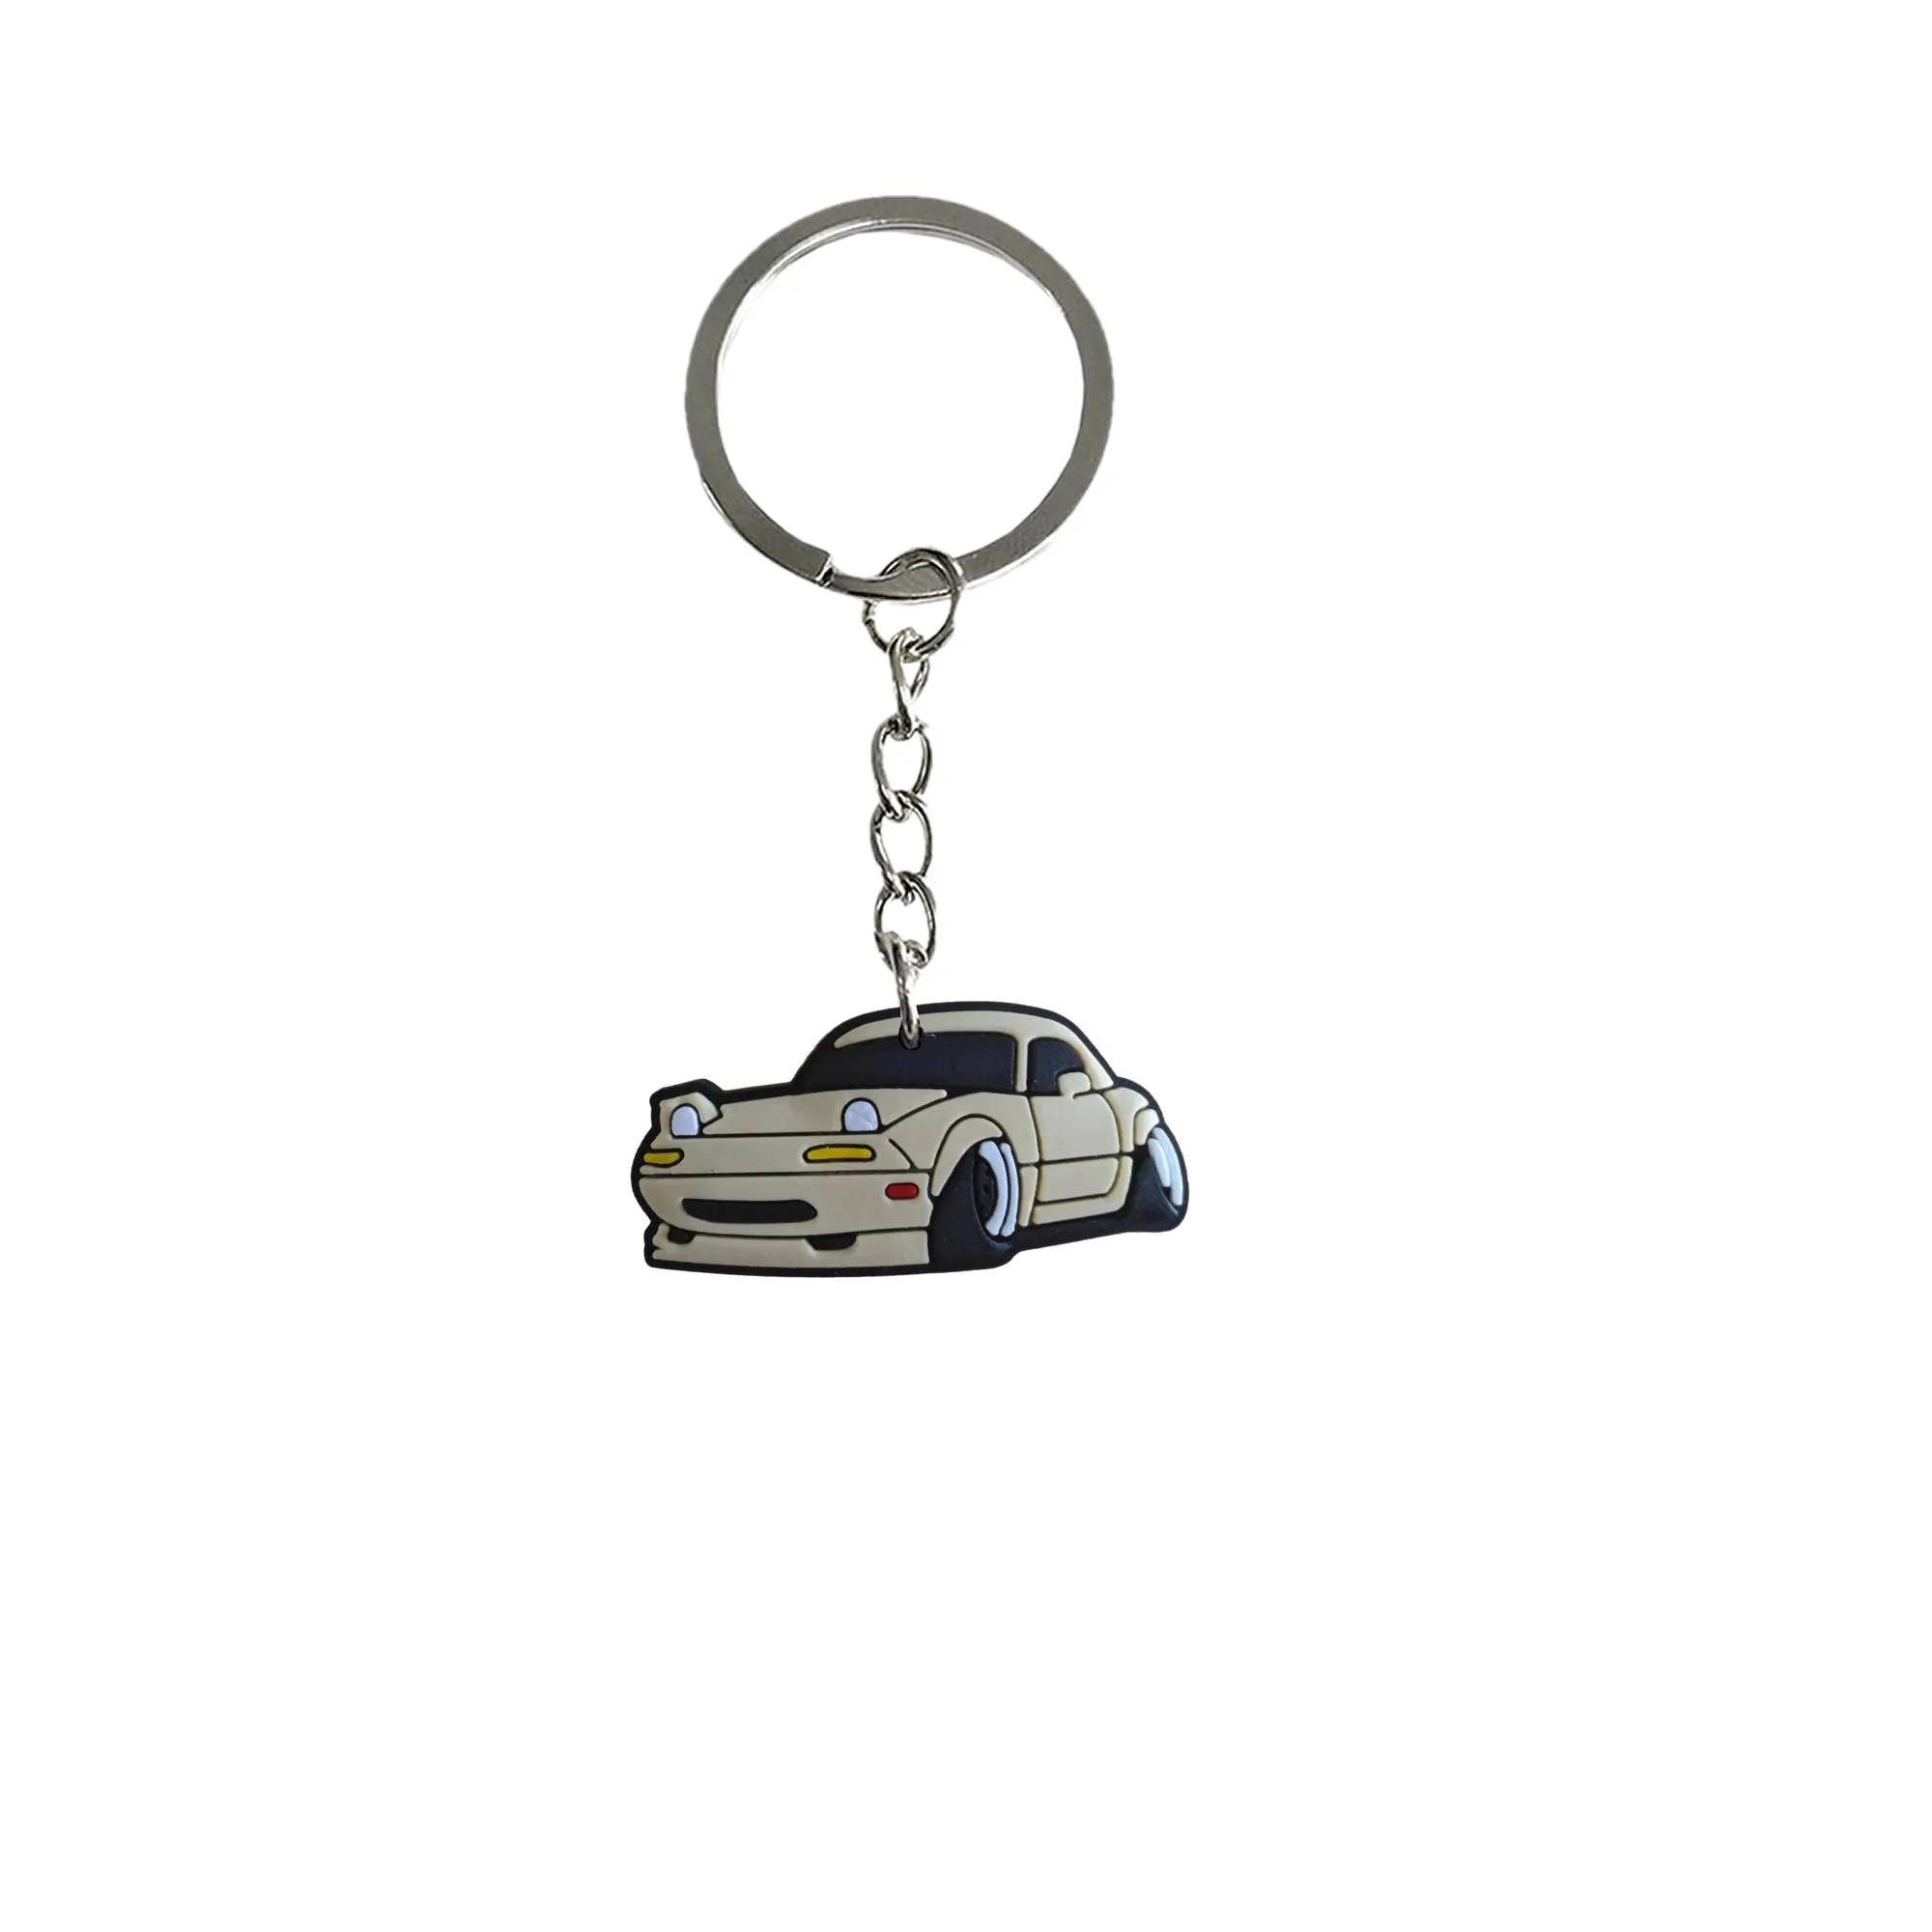 transportation 1 keychain keychains for backpack key chain kid boy girl party favors gift boys keyring suitable schoolbag anime cool backpacks school day birthday supplies men